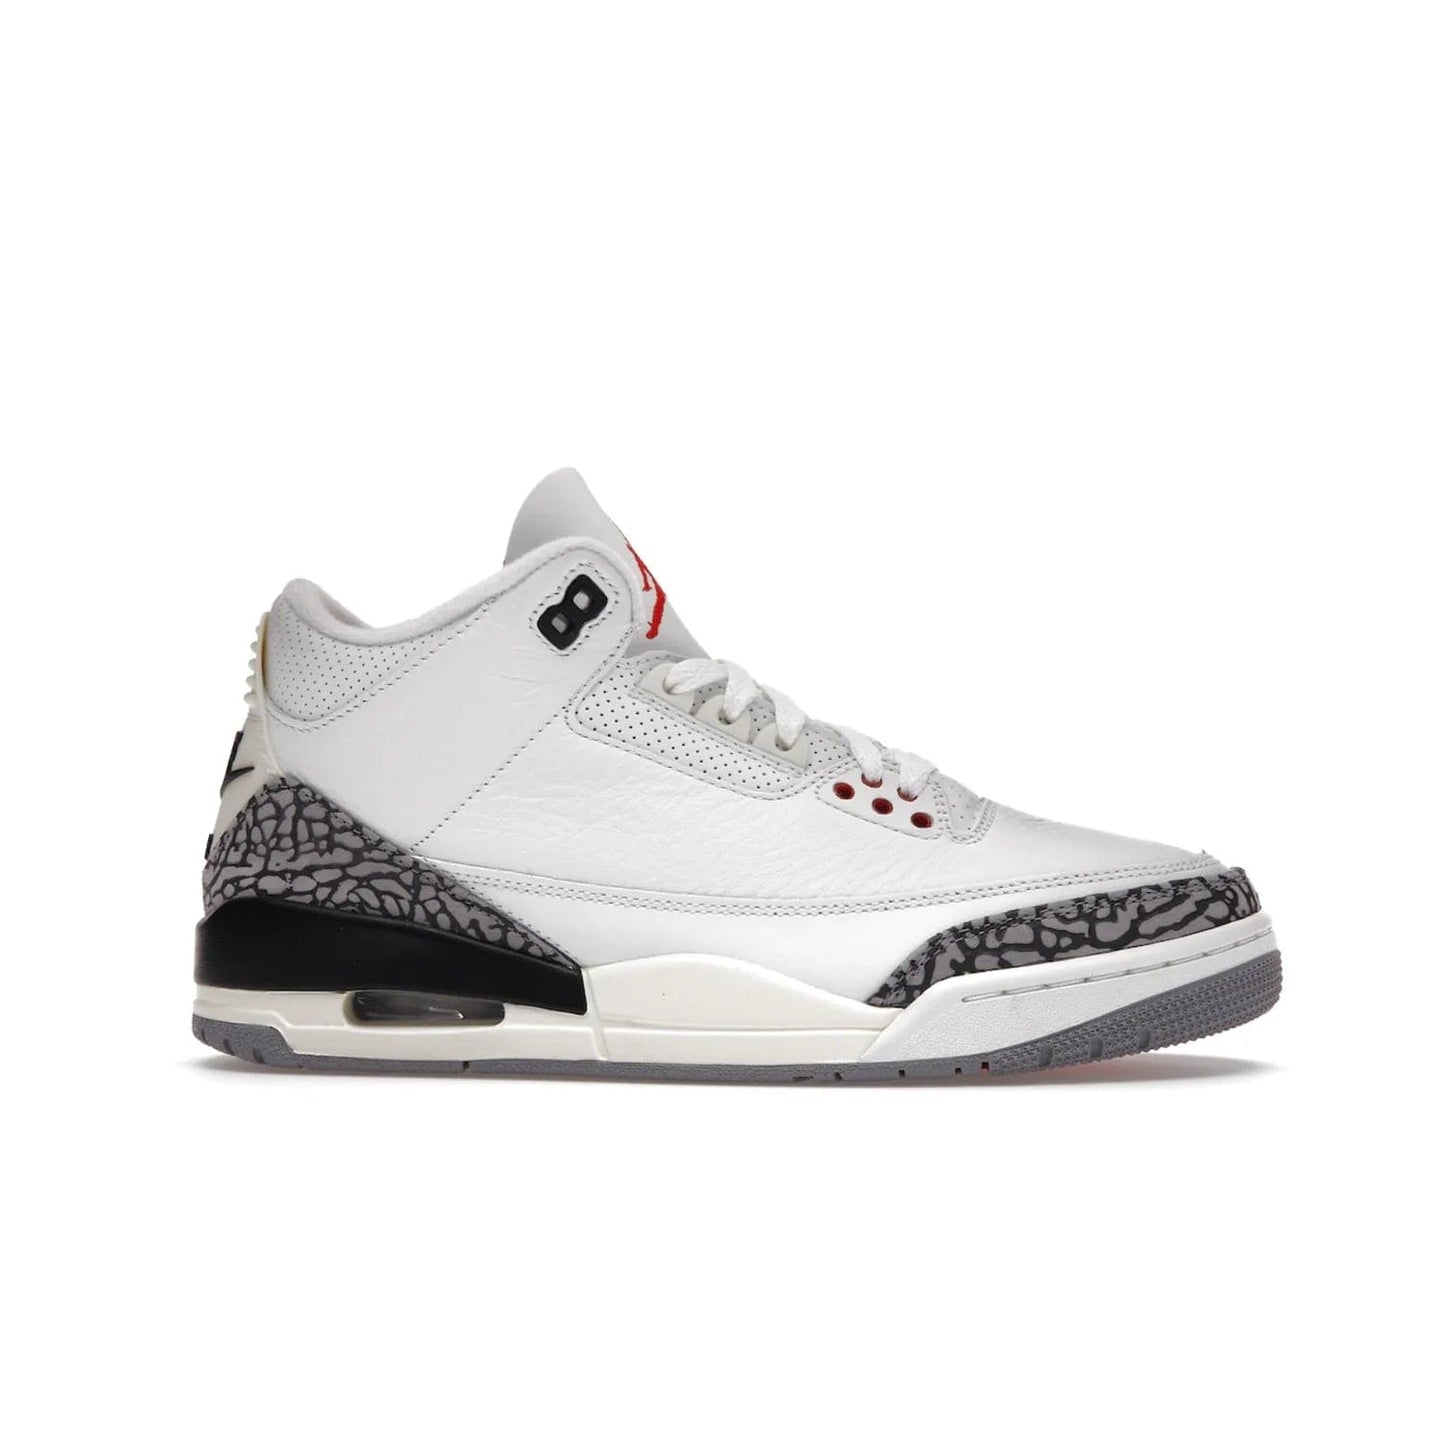 Jordan 3 Retro White Cement Reimagined - Image 2 - Only at www.BallersClubKickz.com - The Reimagined Air Jordan 3 Retro in a Summit White/Fire Red/Black/Cement Grey colorway is launching on March 11, 2023. Featuring a white leather upper, off-white midsoles and heel tabs, this vintage-look sneaker is a must-have.